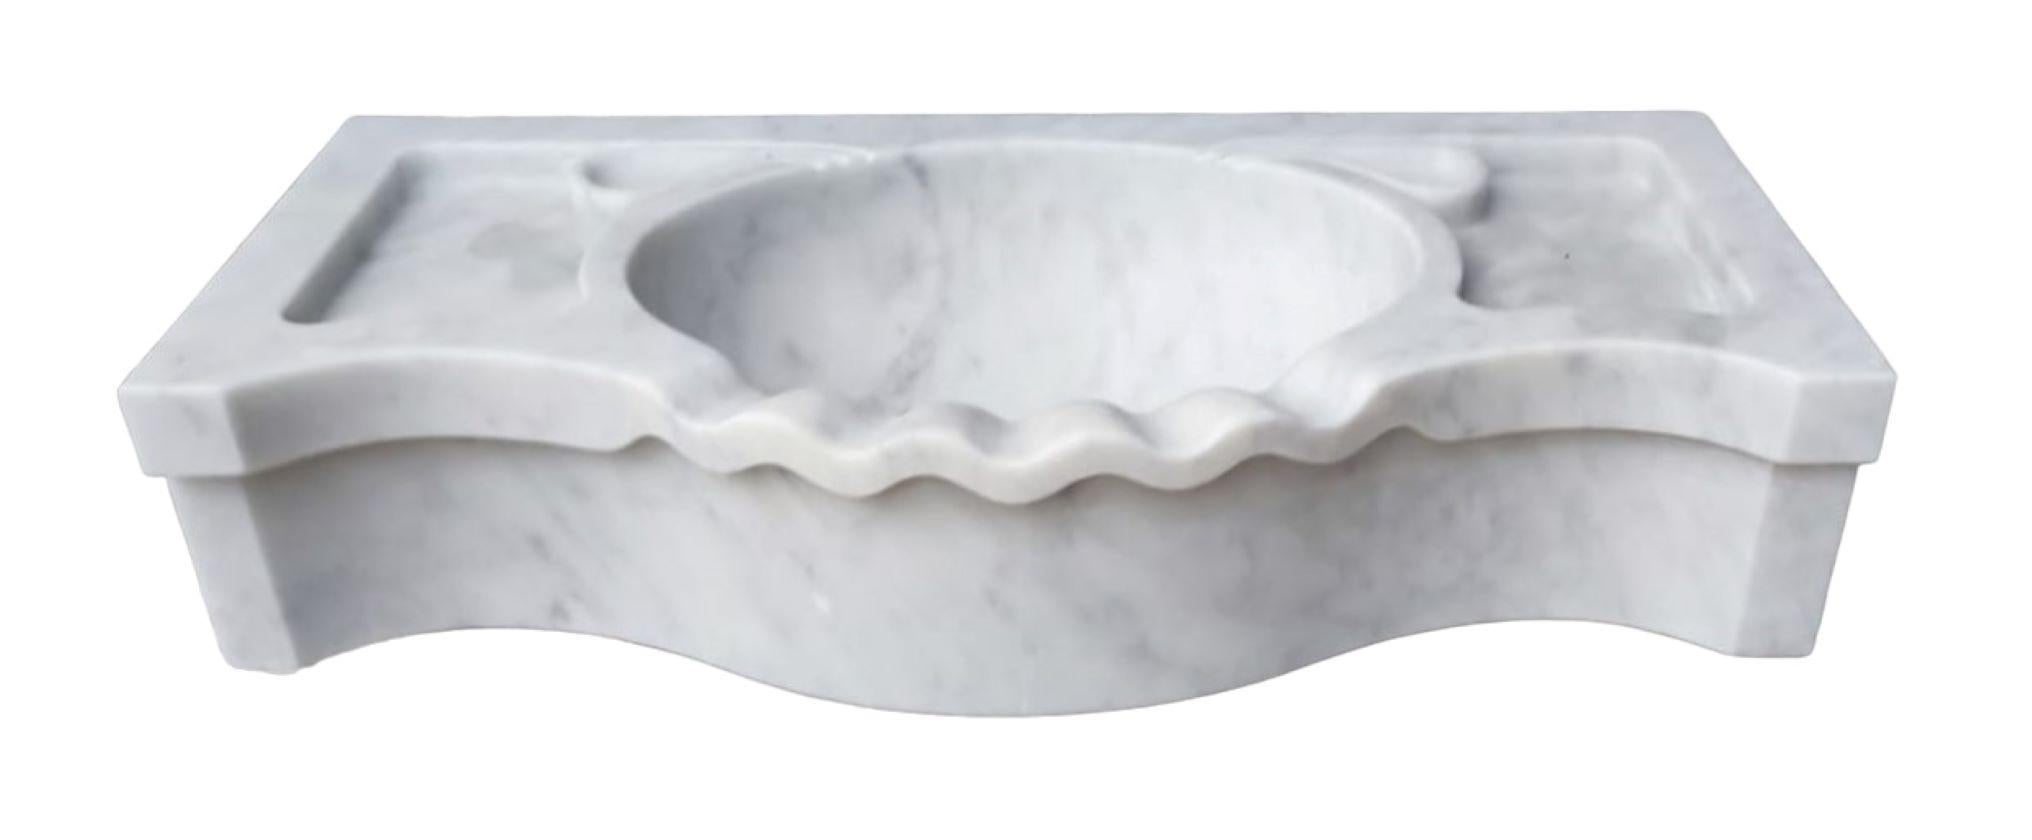 Classical Serpentine Marble Stone Sink Basin

This timeless beautiful Italian classical sink is cut from one single block of white marble, these designs have not changed since Greek and Roman times, it carries superb artistic merit easily fitting in